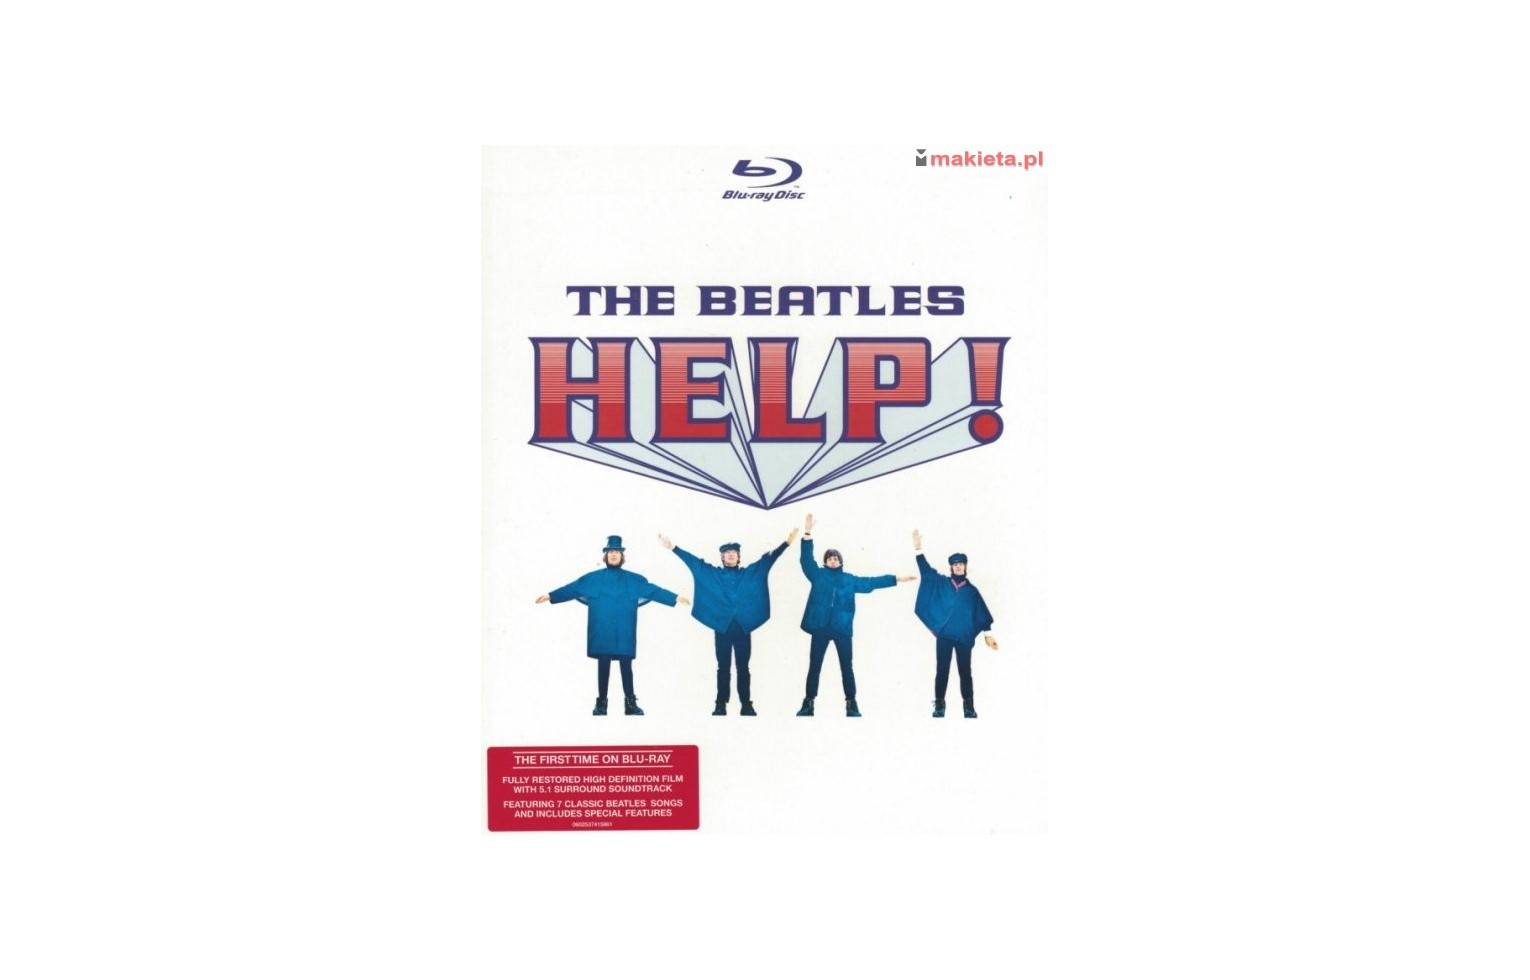 The Beatles - Help! - Blu-ray - film HD - 5.1 Surround DTS-HD MASTER